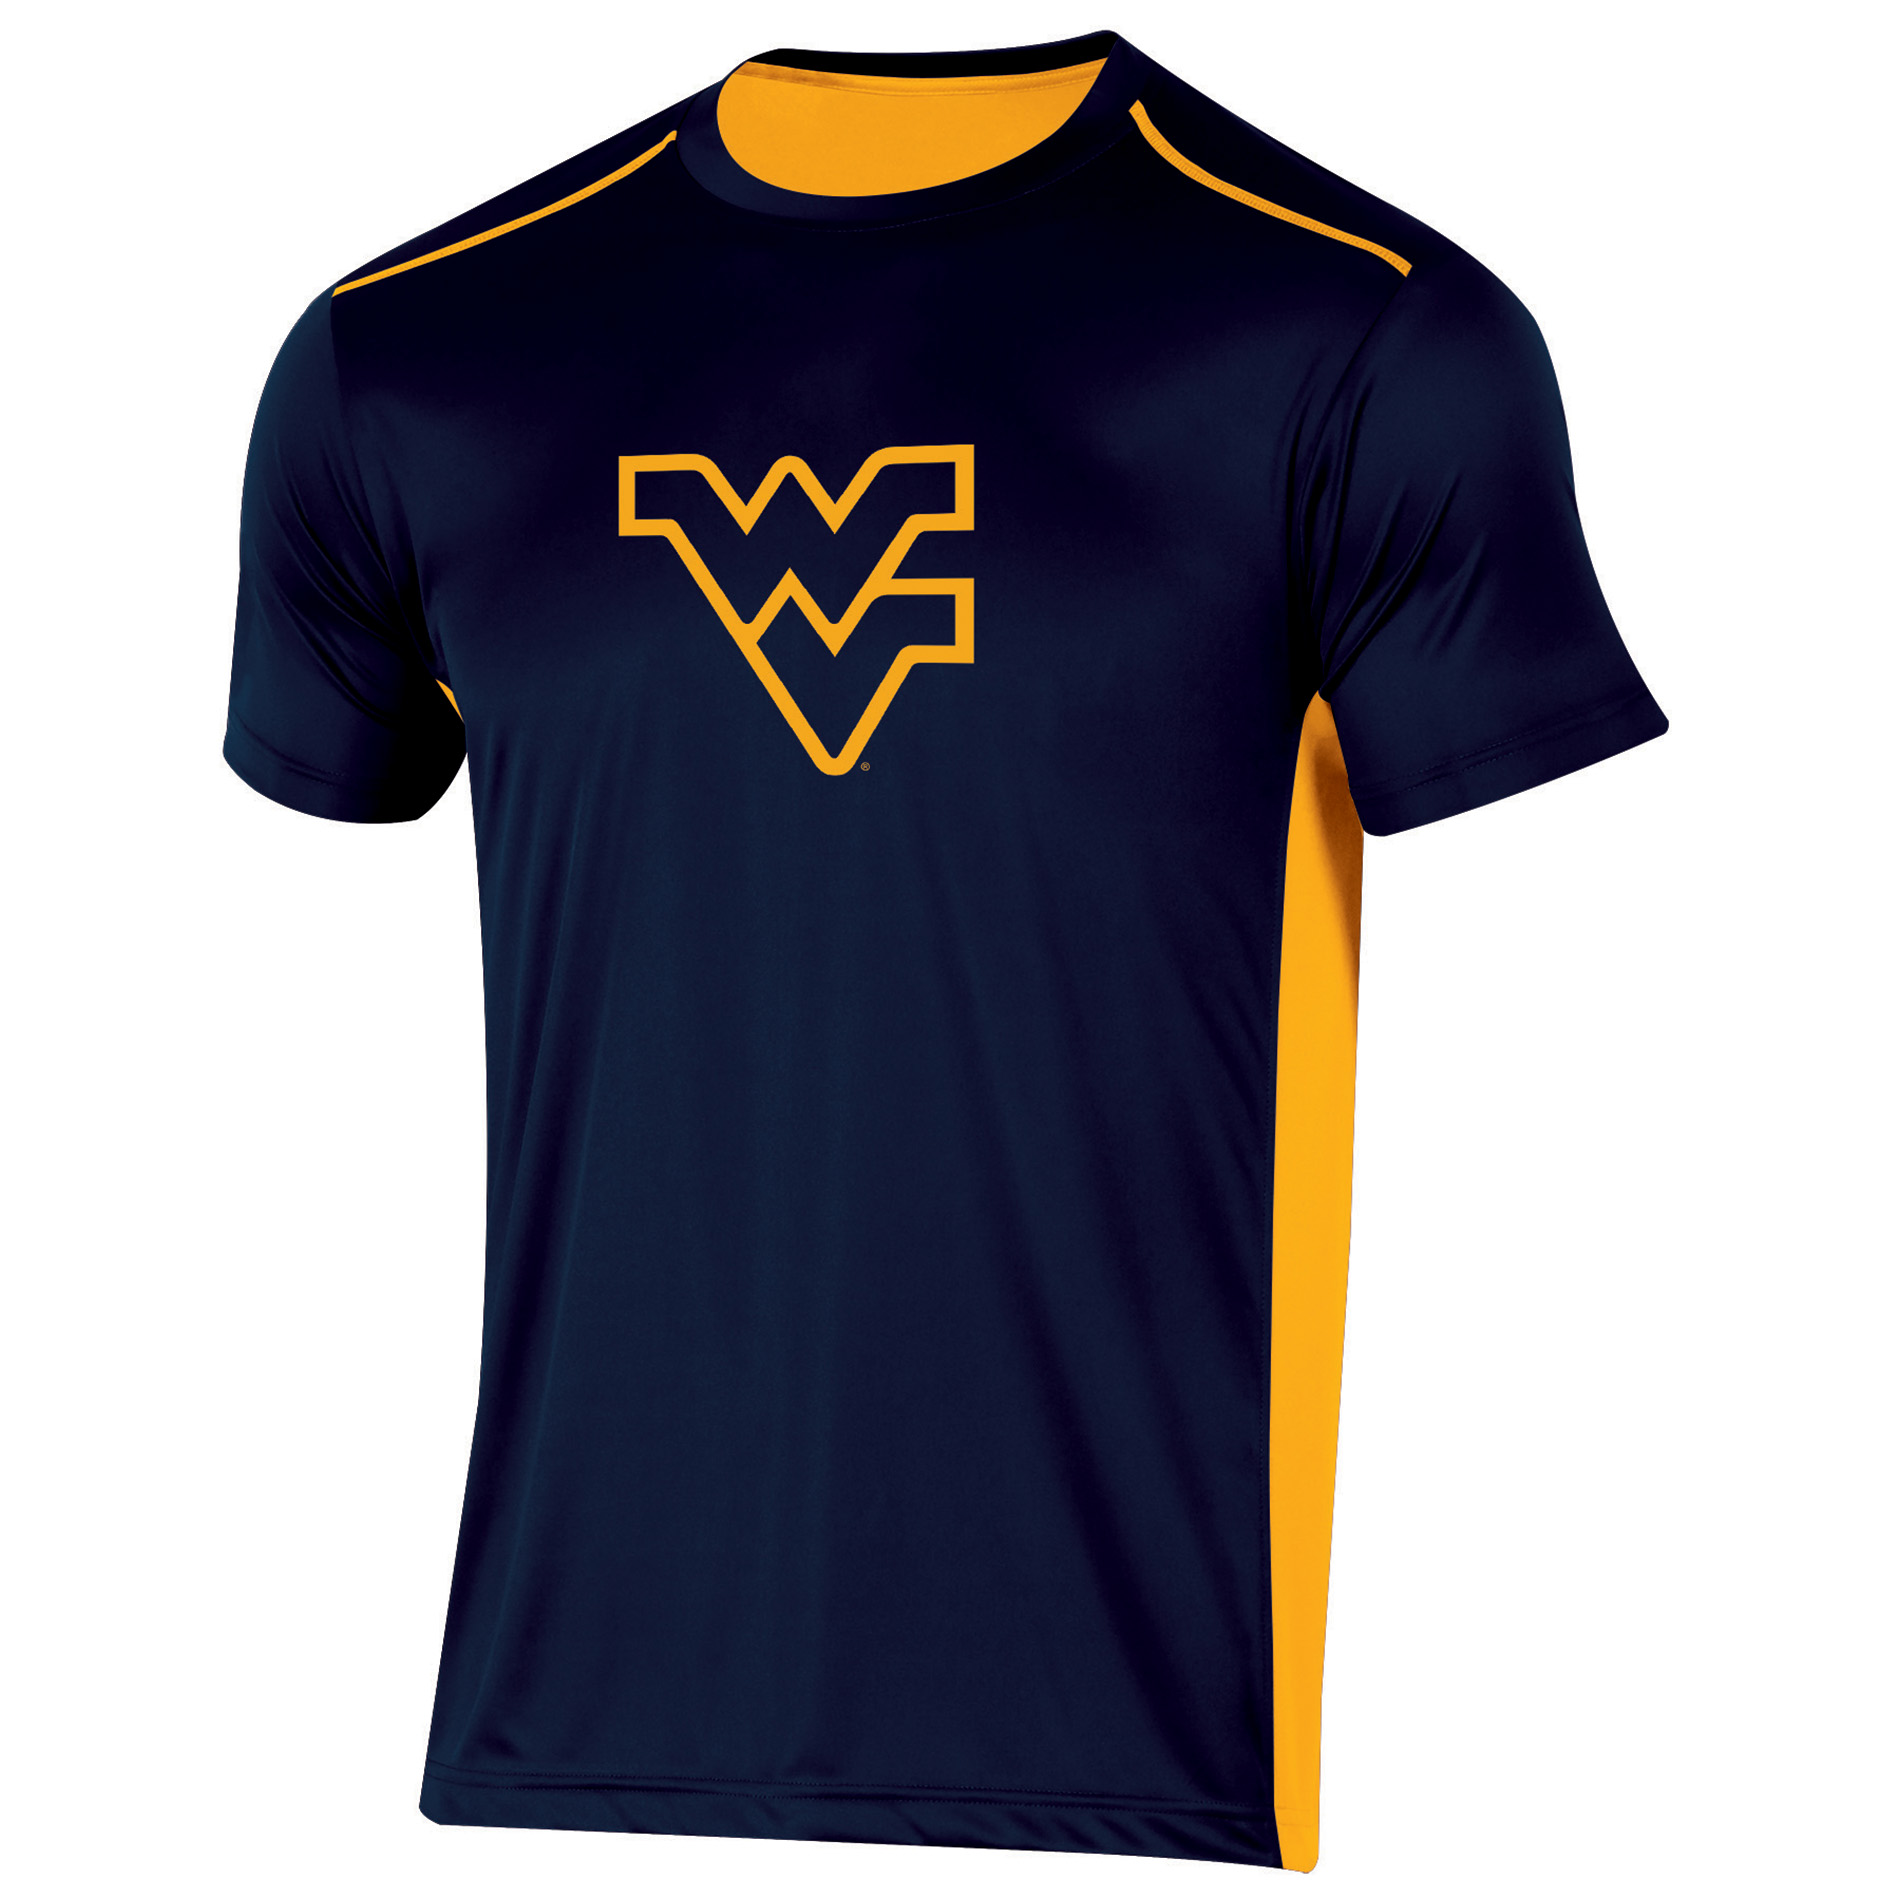 NCAA Men&#8217;s Big & Tall Short-Sleeve Athletic Fit T-Shirt - West Virginia Mountaineers